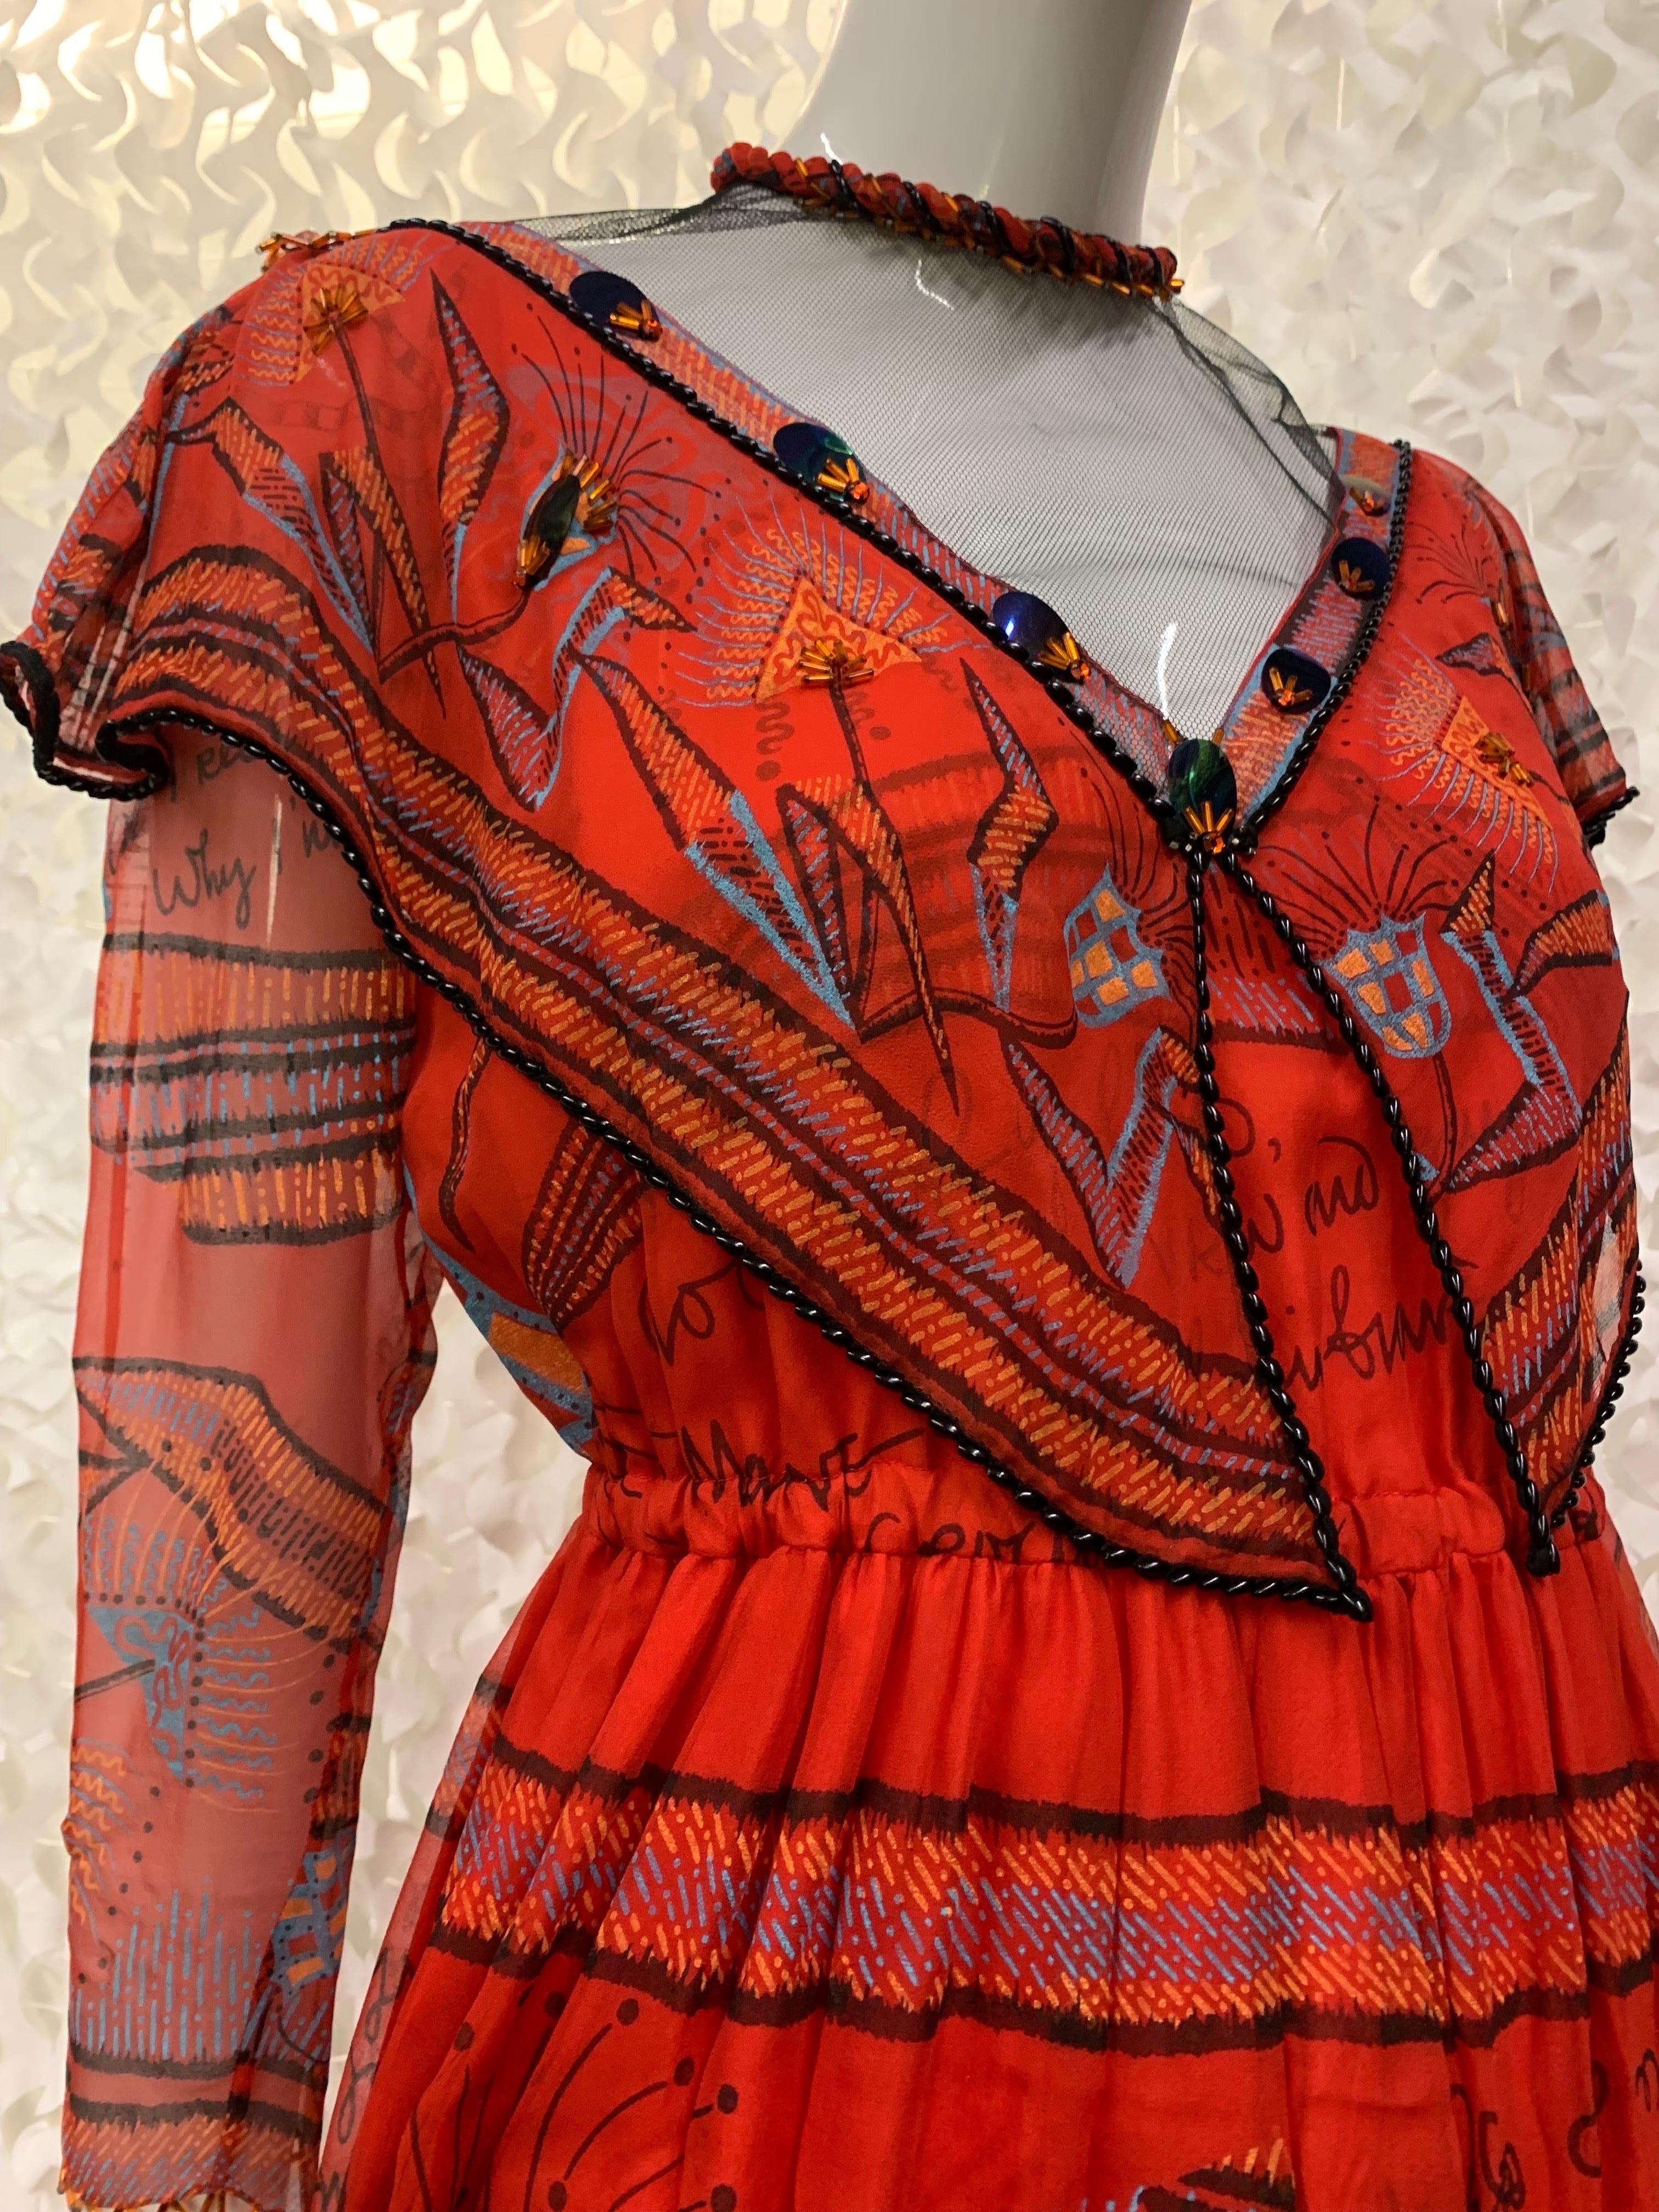 1970s Zandra Rhodes Red Silk Chiffon Print Boho London Maxi Dress w Bead Details In Excellent Condition For Sale In Gresham, OR